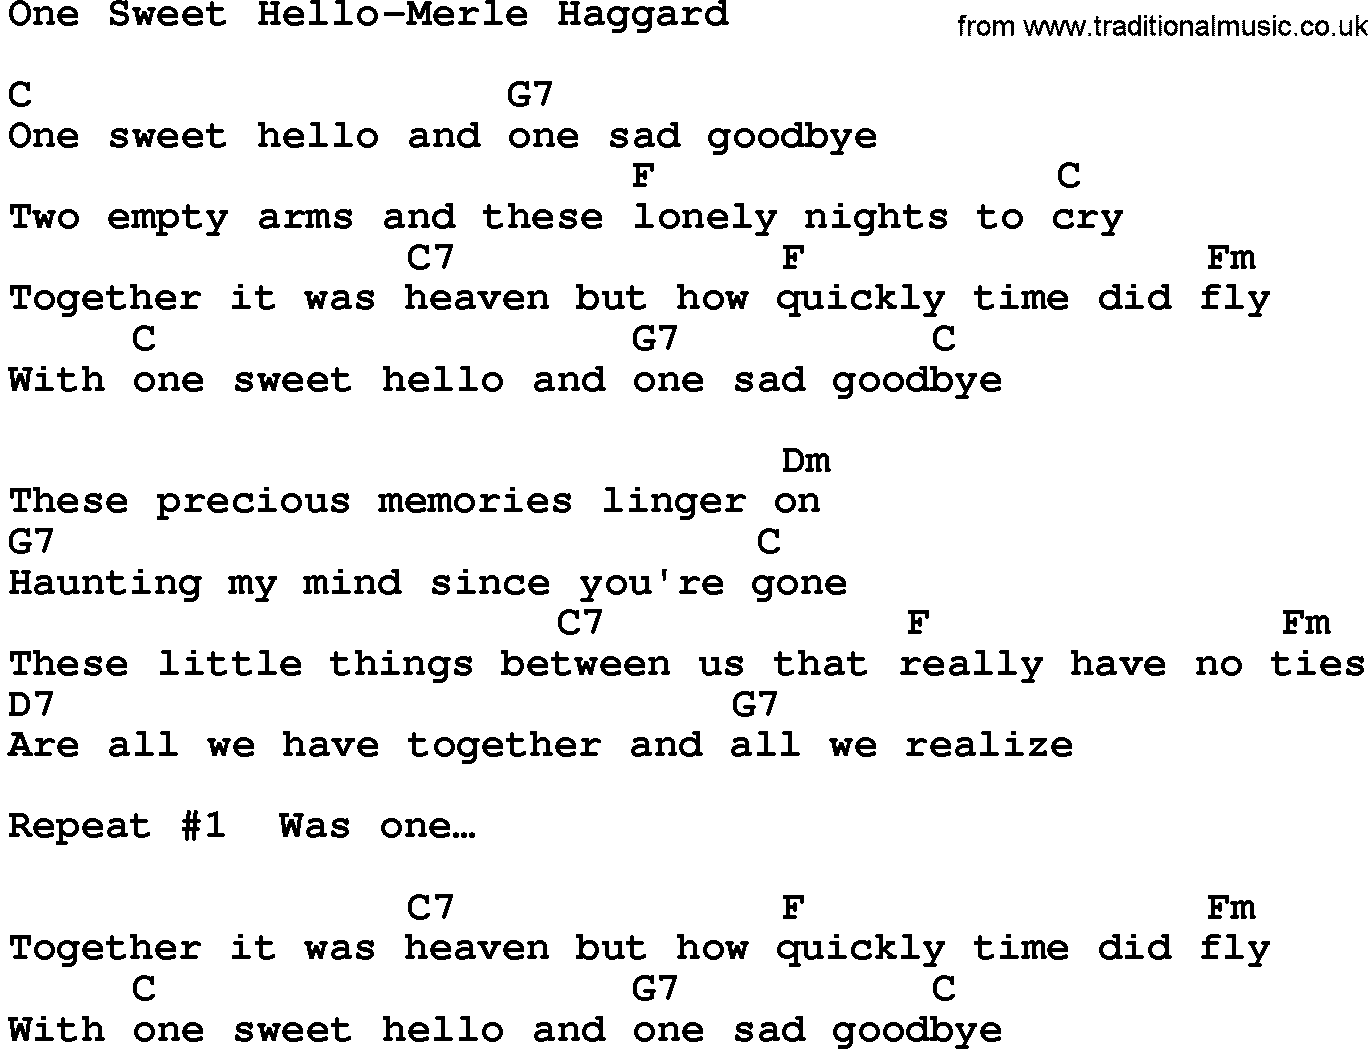 Country music song: One Sweet Hello-Merle Haggard lyrics and chords